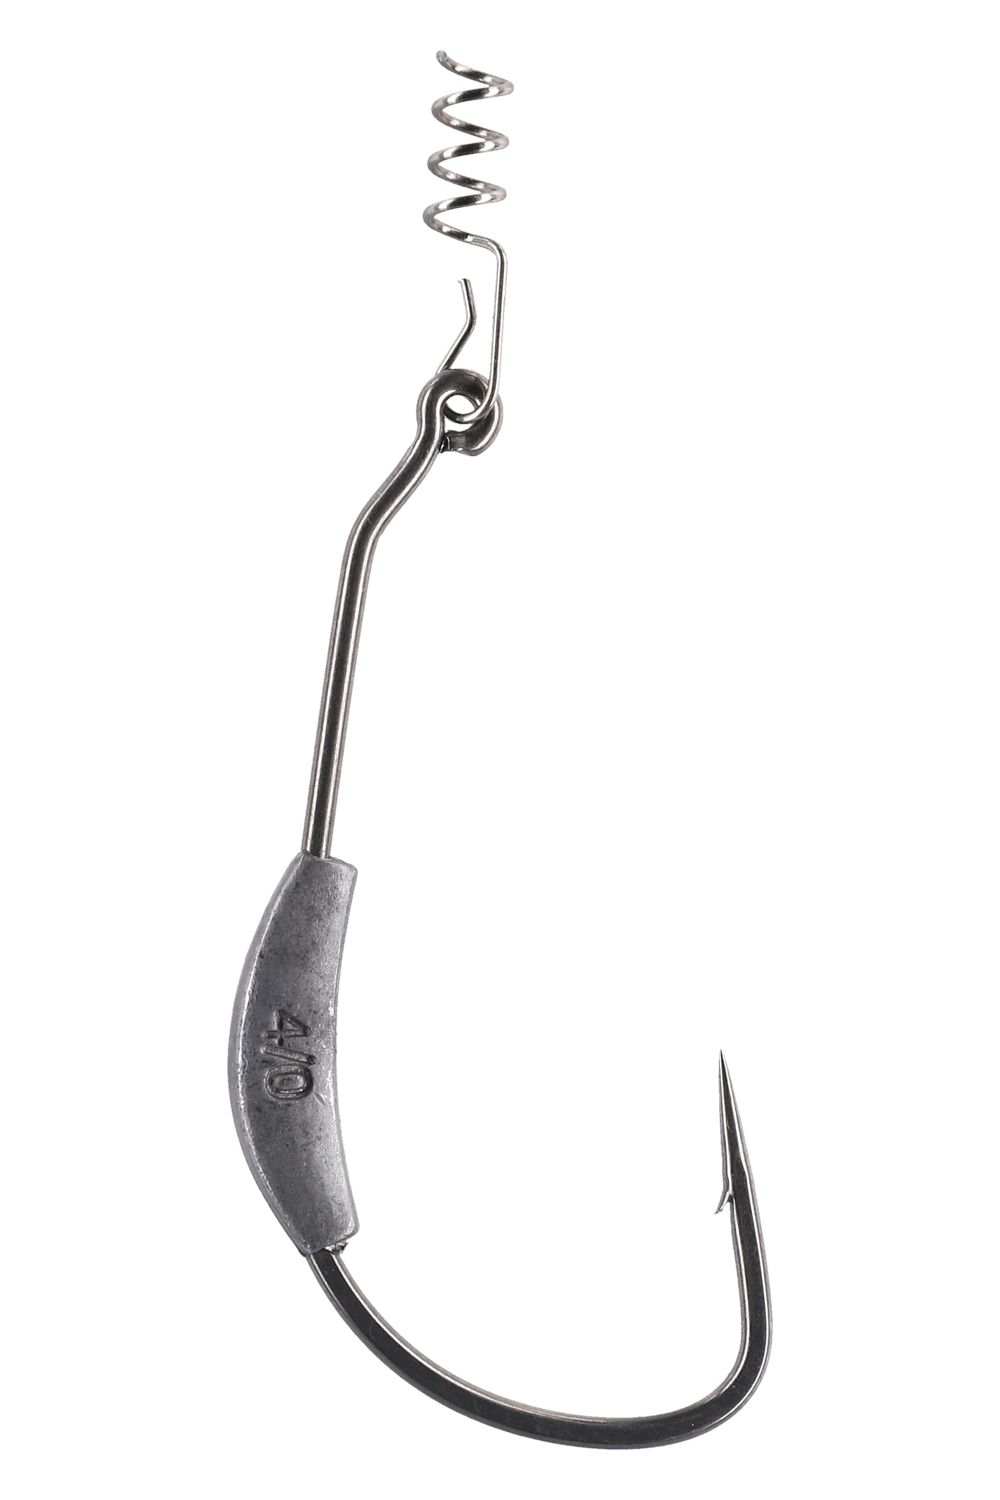 Mikado Offset Weedless Worm Hook With Screw Weighted 4/0 : 7g